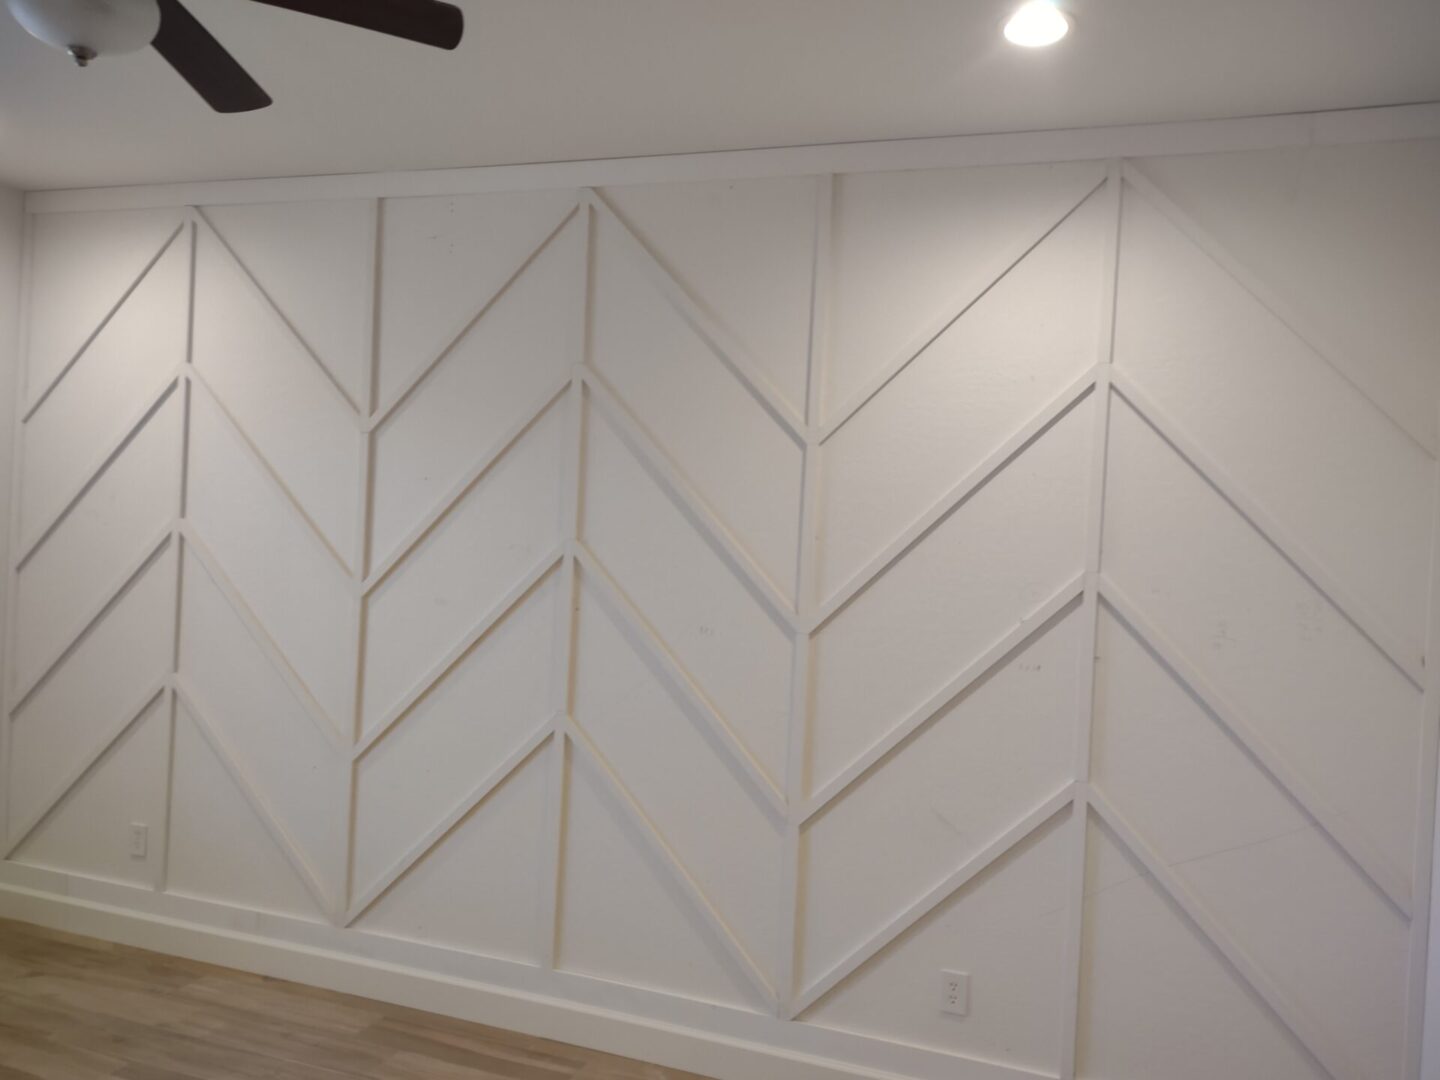 A white wall with wooden chevron pattern on it.